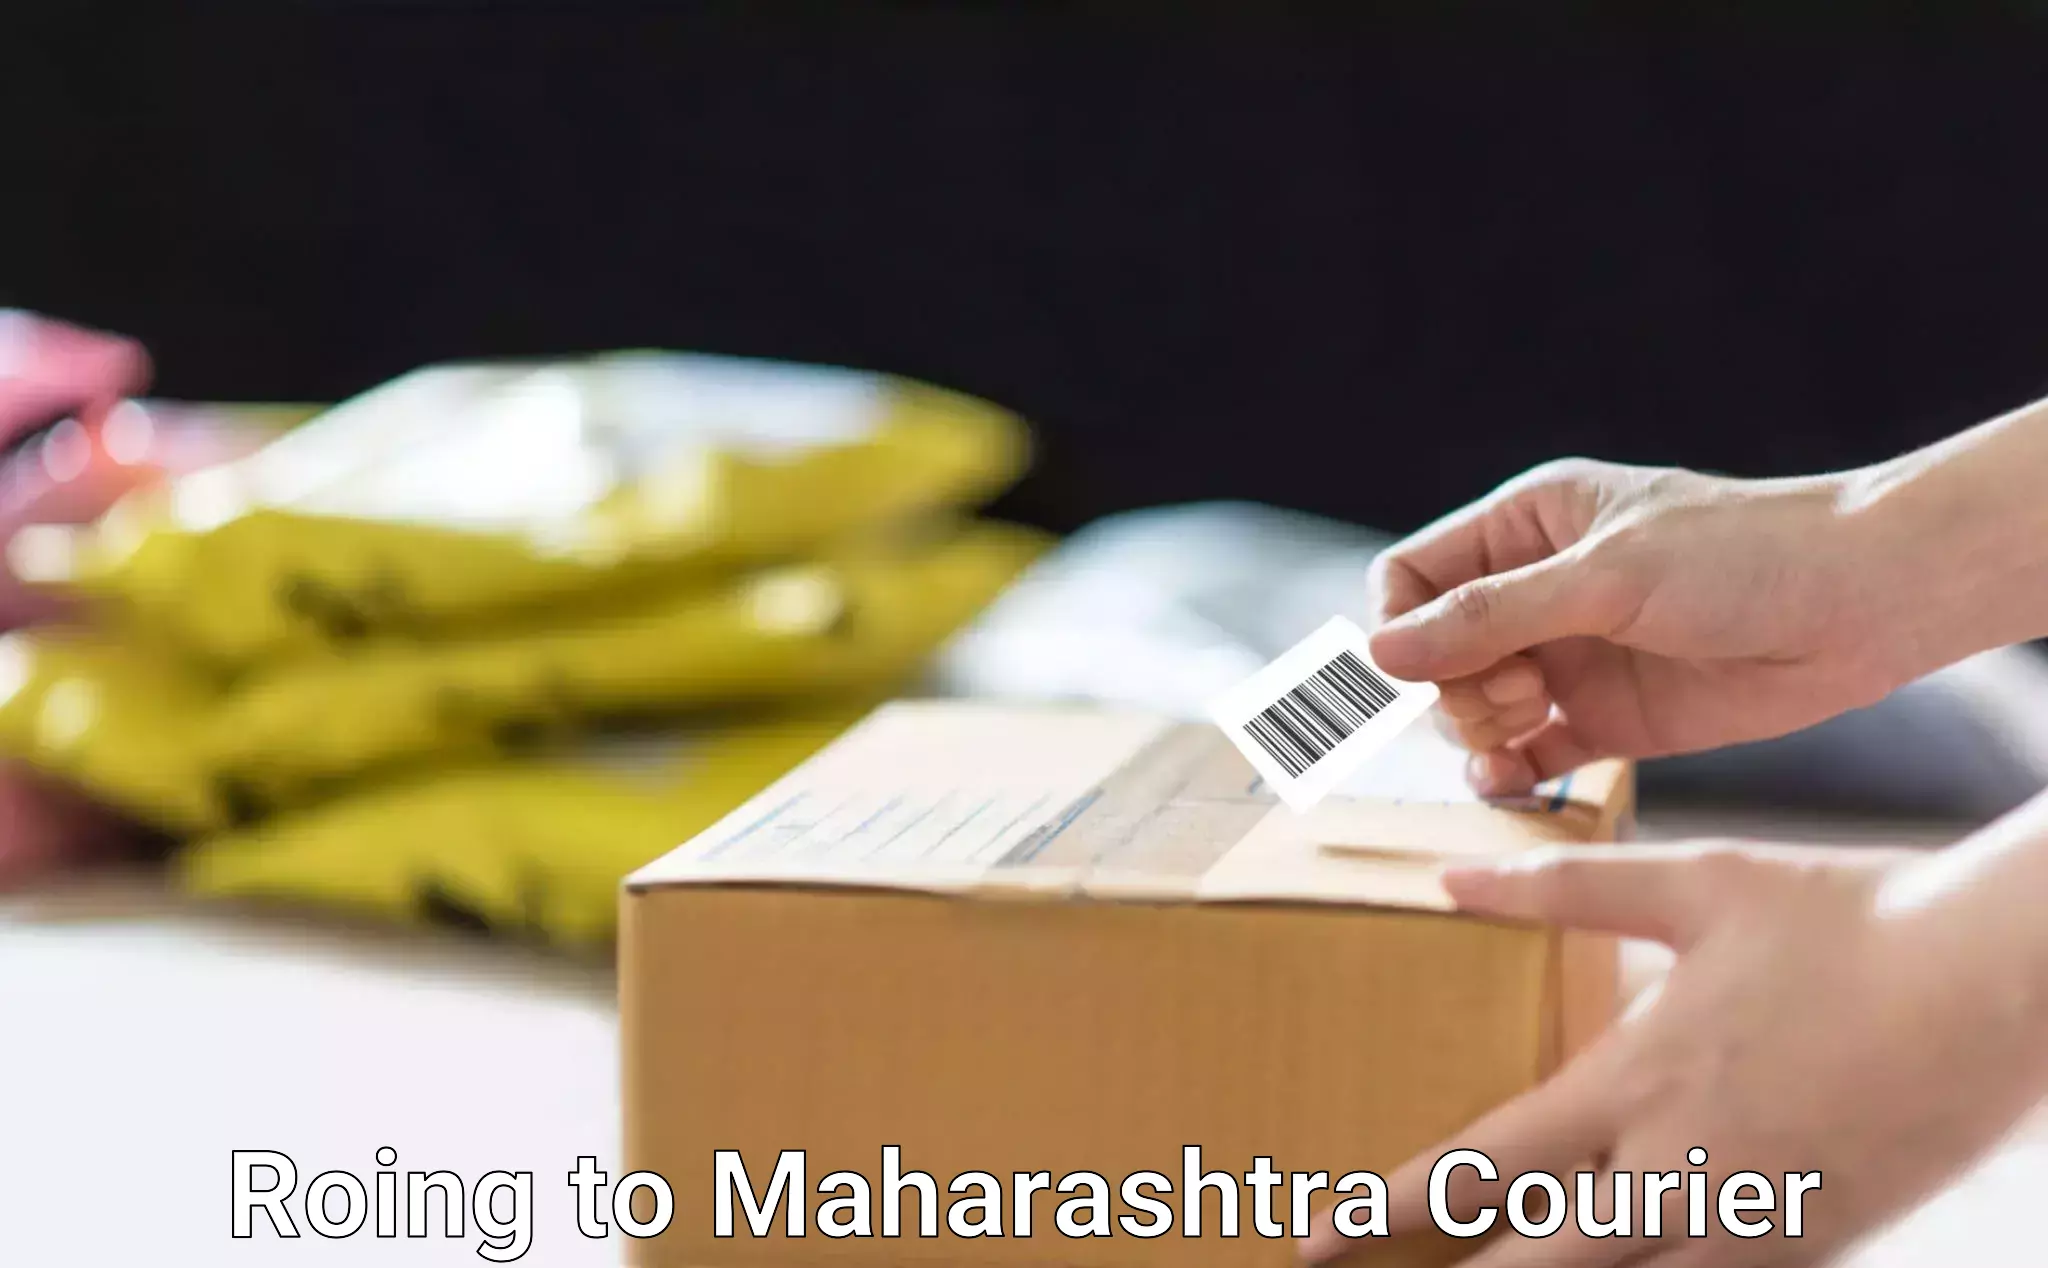 Fast delivery service in Roing to Maharashtra